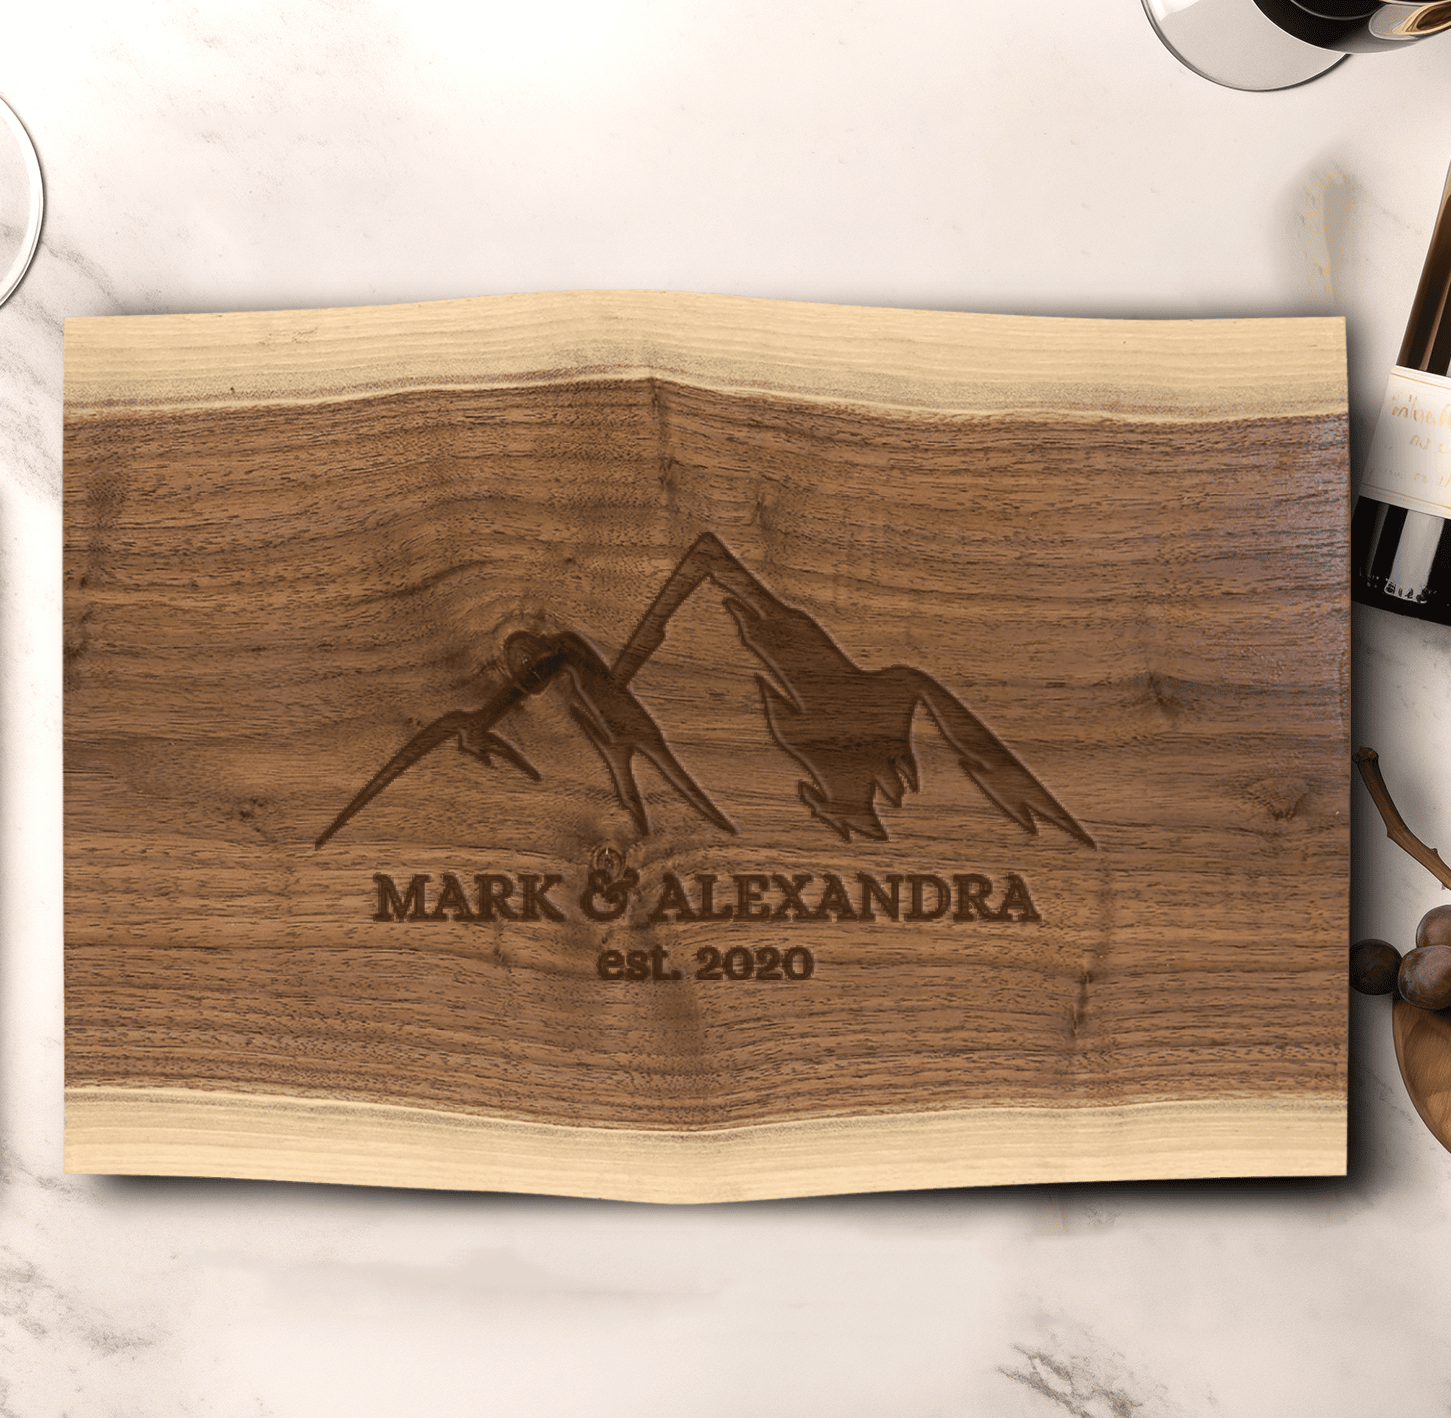 Anniversary Walnut Cutting Board With Romantic Rondezvous Design